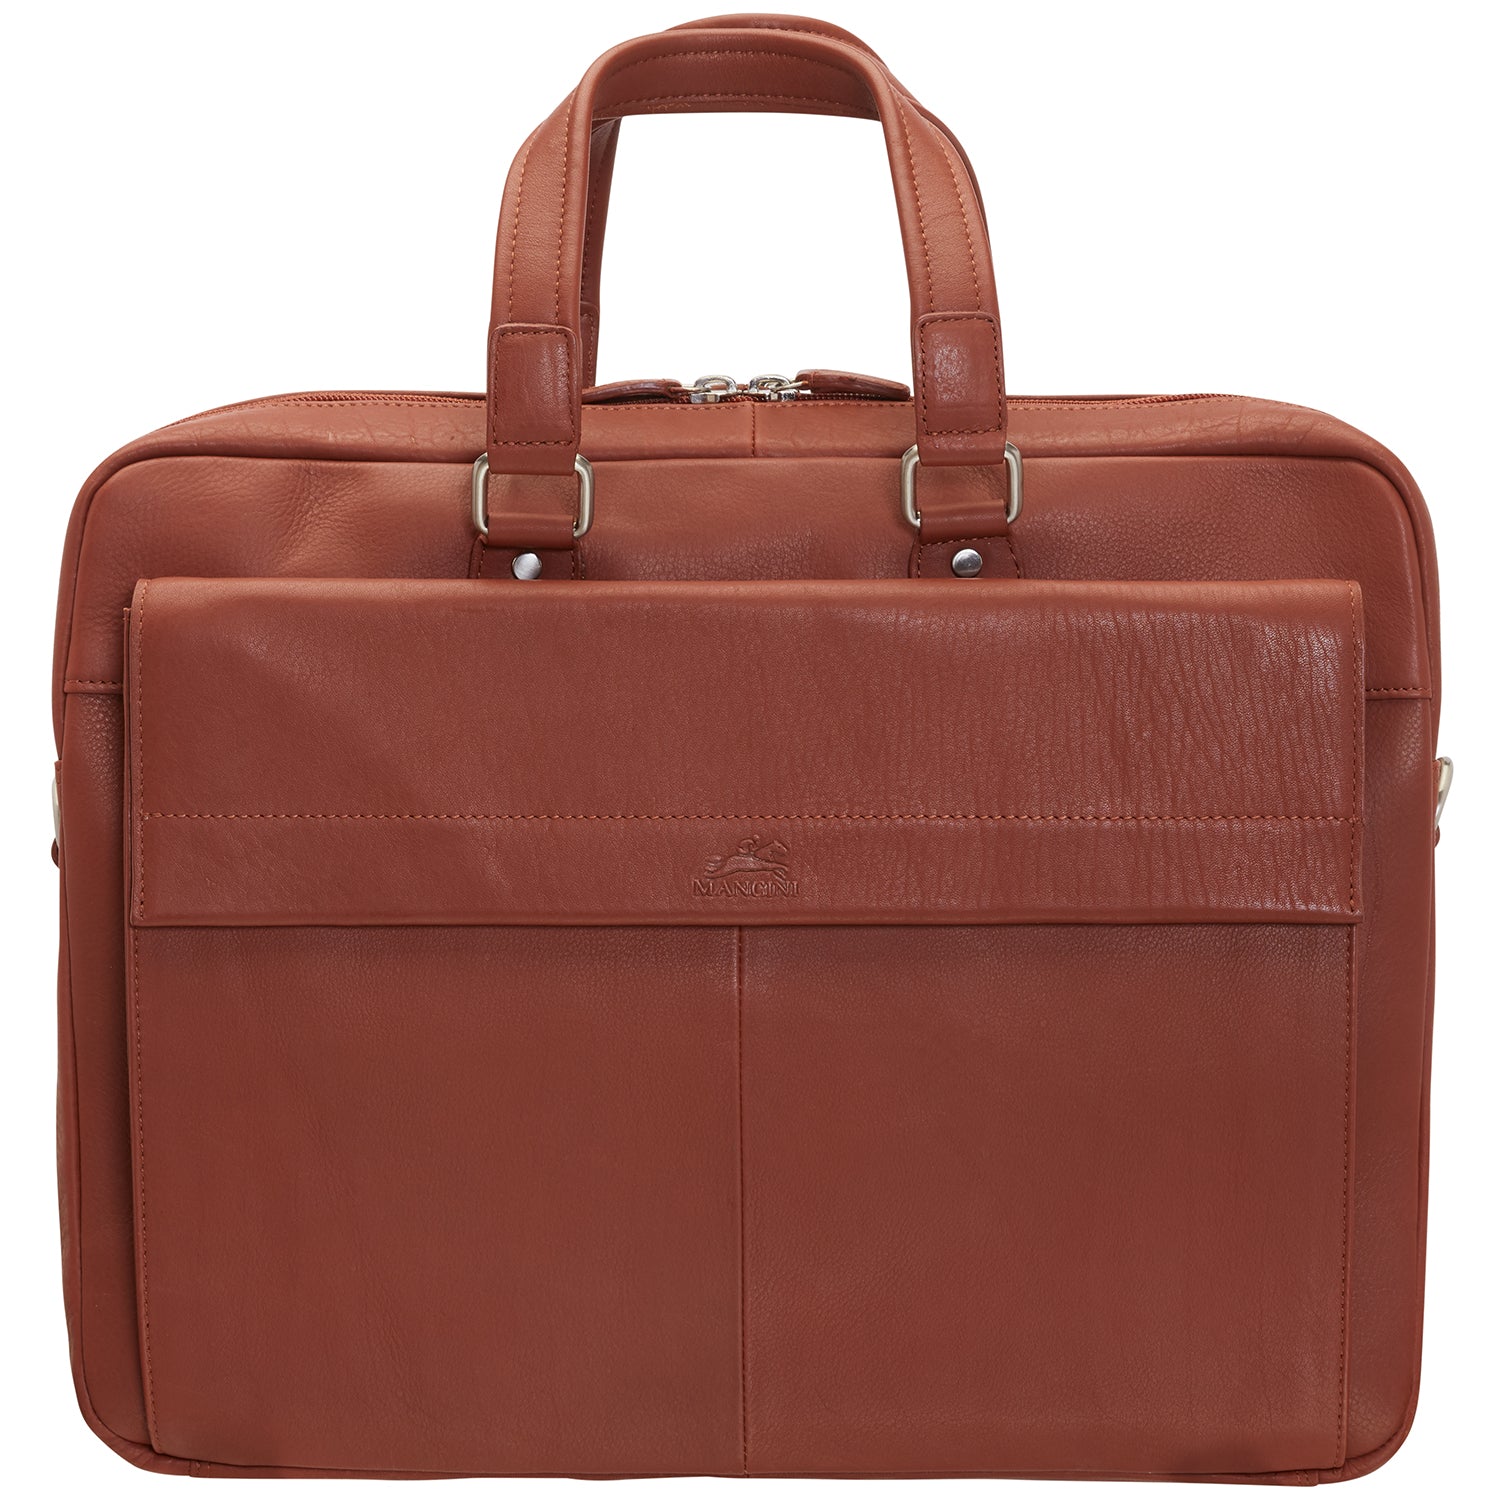 Mancini Leather Double Compartment Briefcase for 15.6" Laptop and Tablet, 16.25" x 4" x 12", Cognac